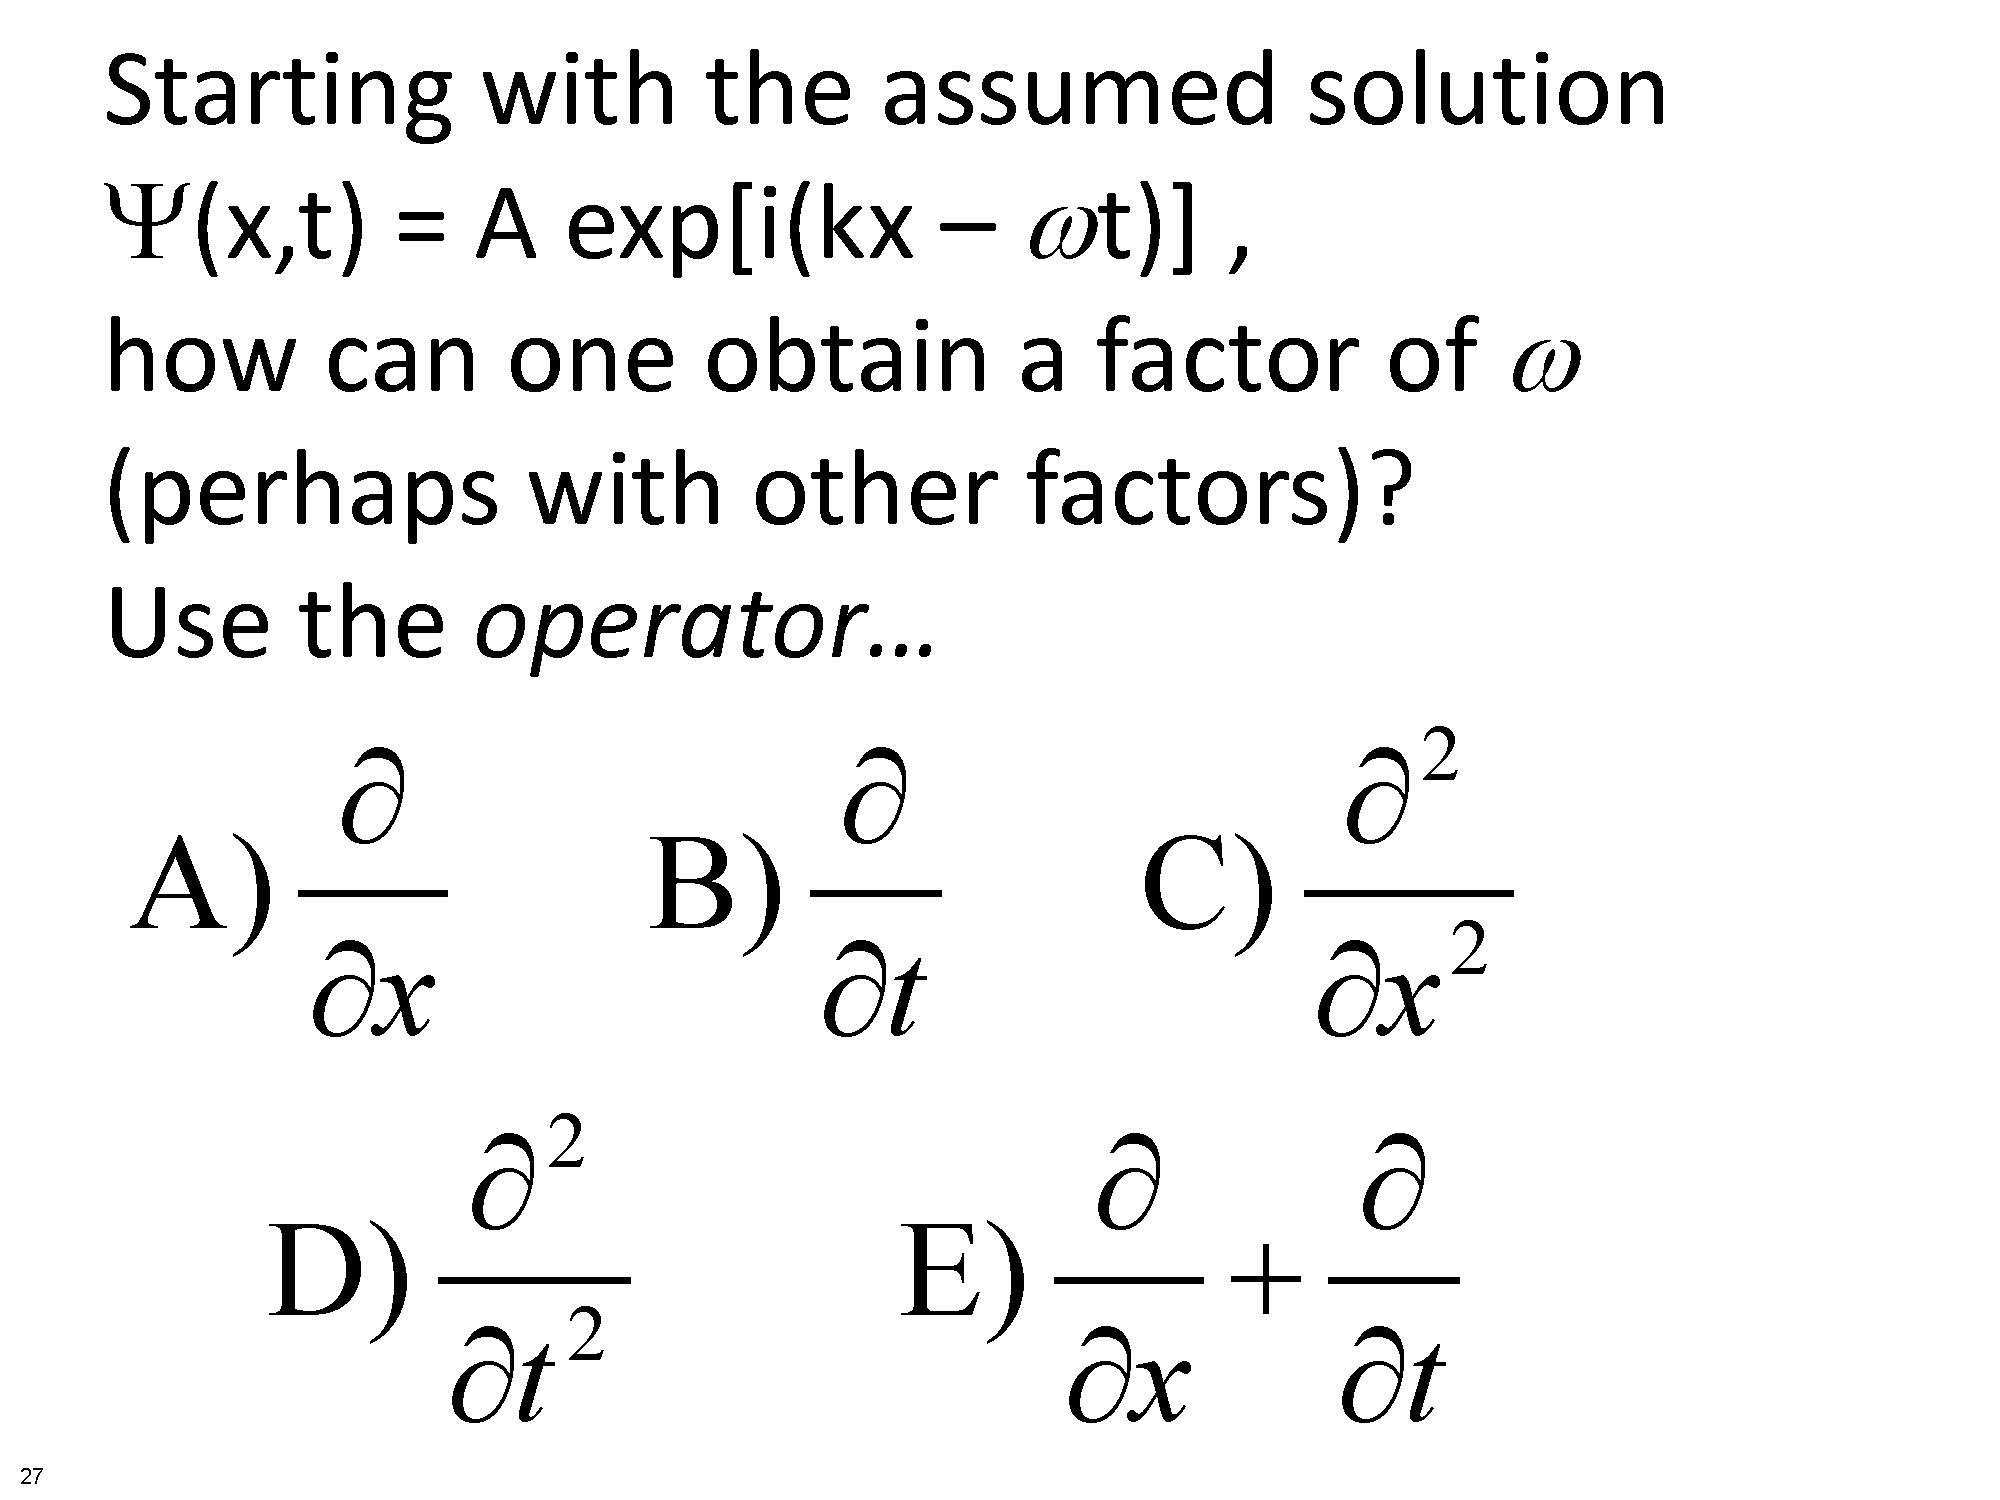 PHY4604 I clicker questions page 14